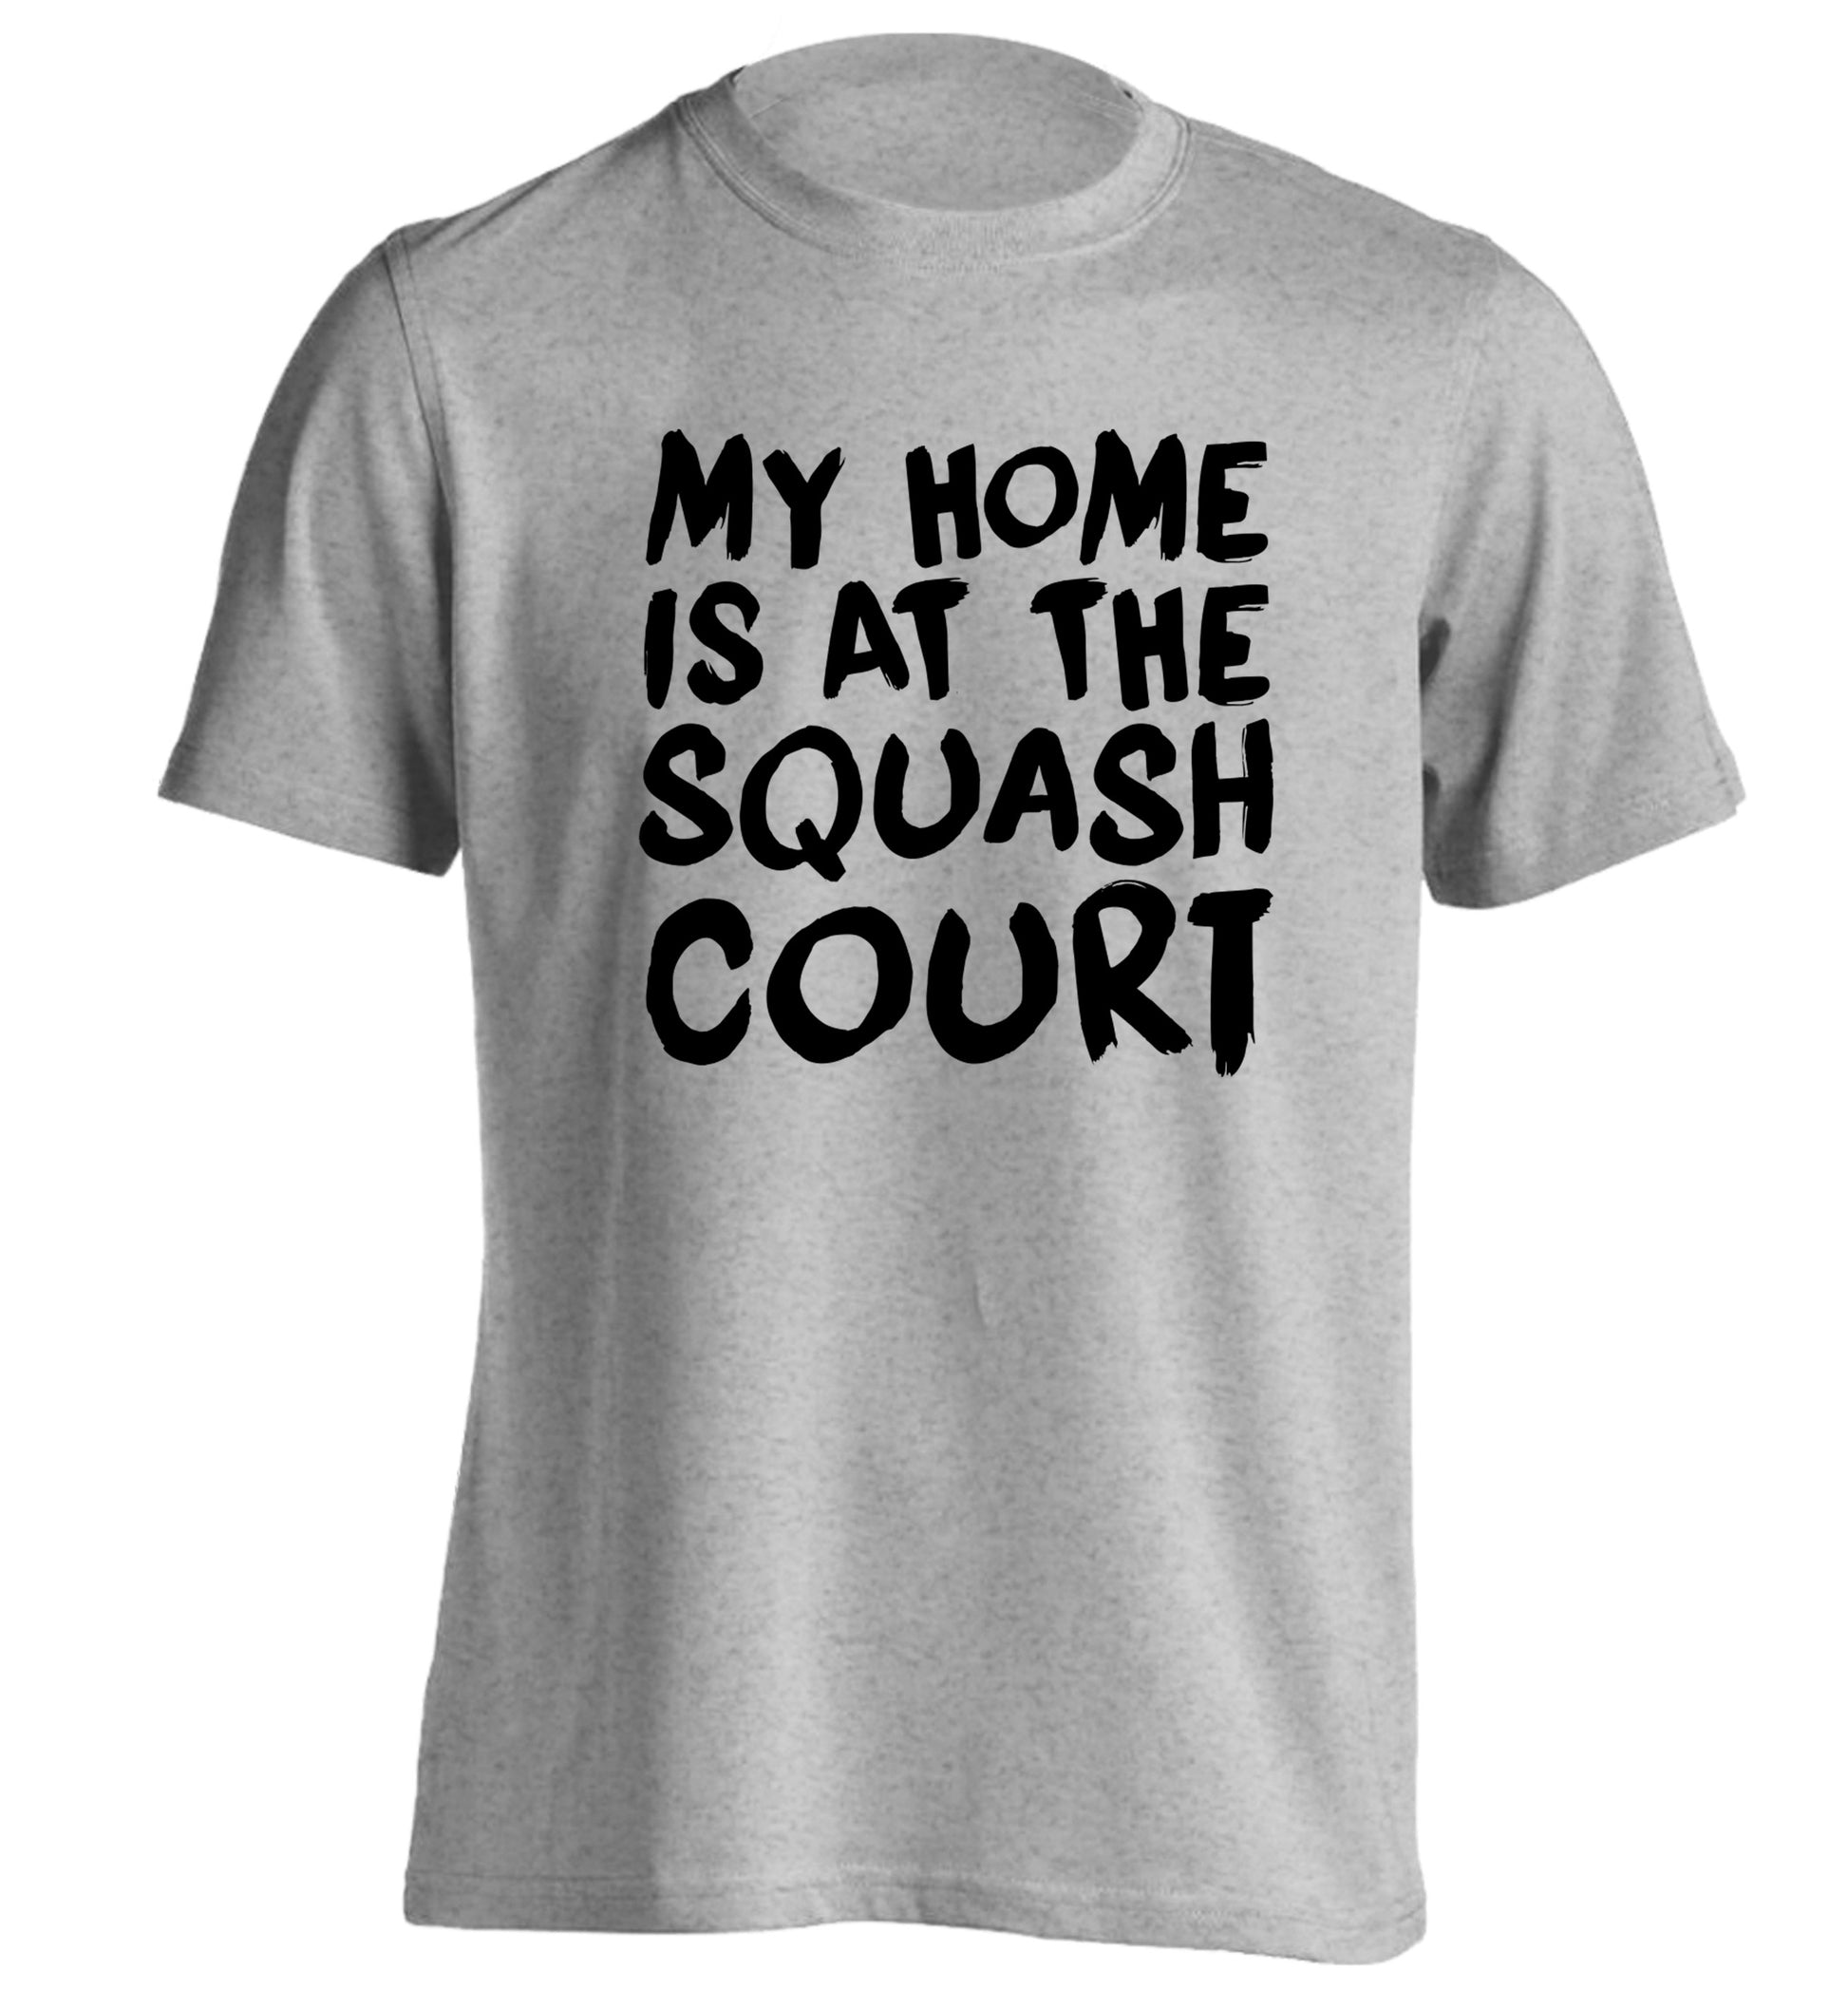 My home is at the squash court adults unisex grey Tshirt 2XL